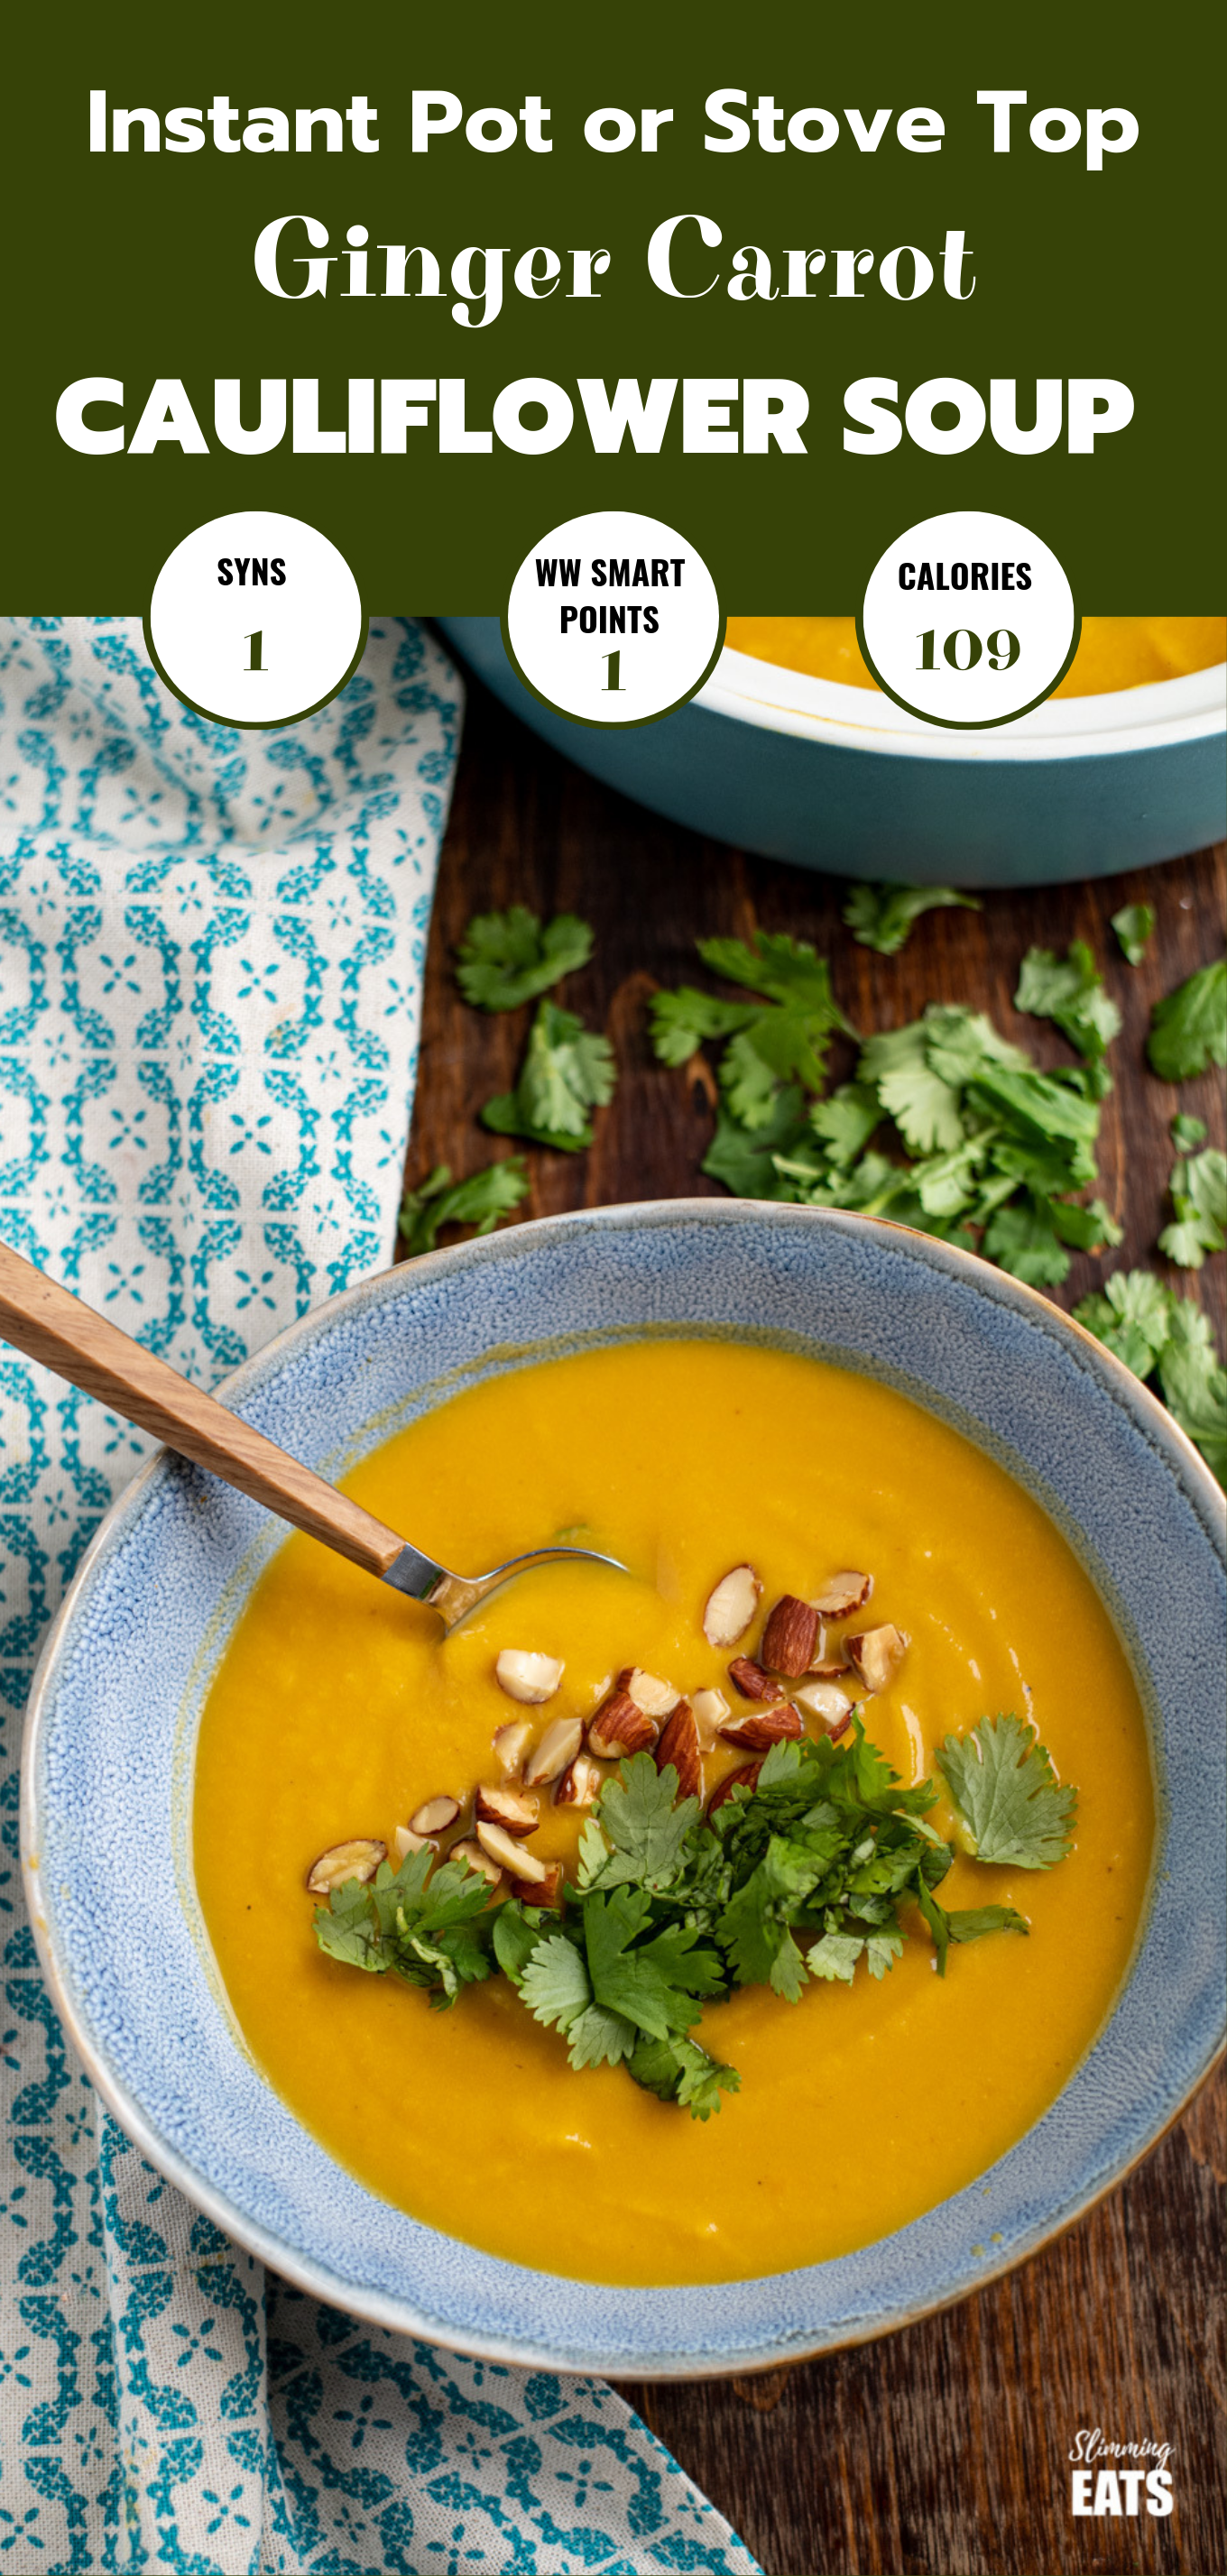 Ginger Carrot Cauliflower Soup featured pin image